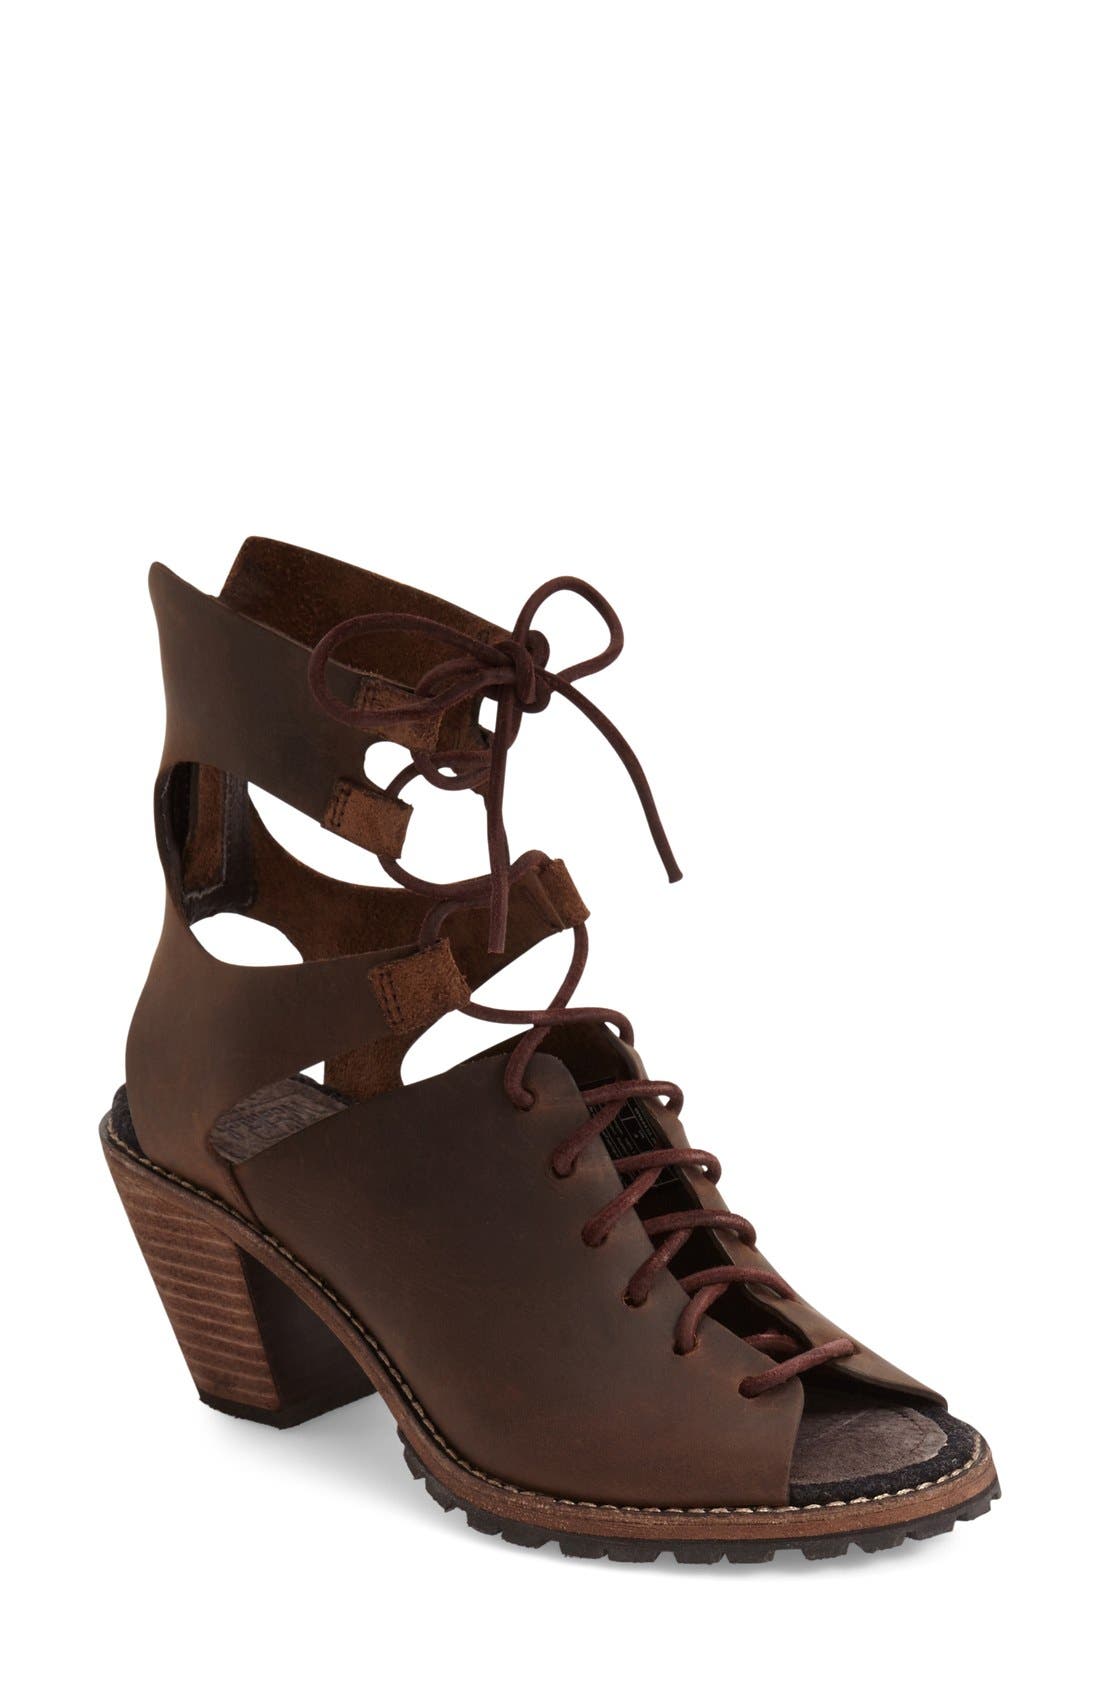 nordstrom rack boots womens